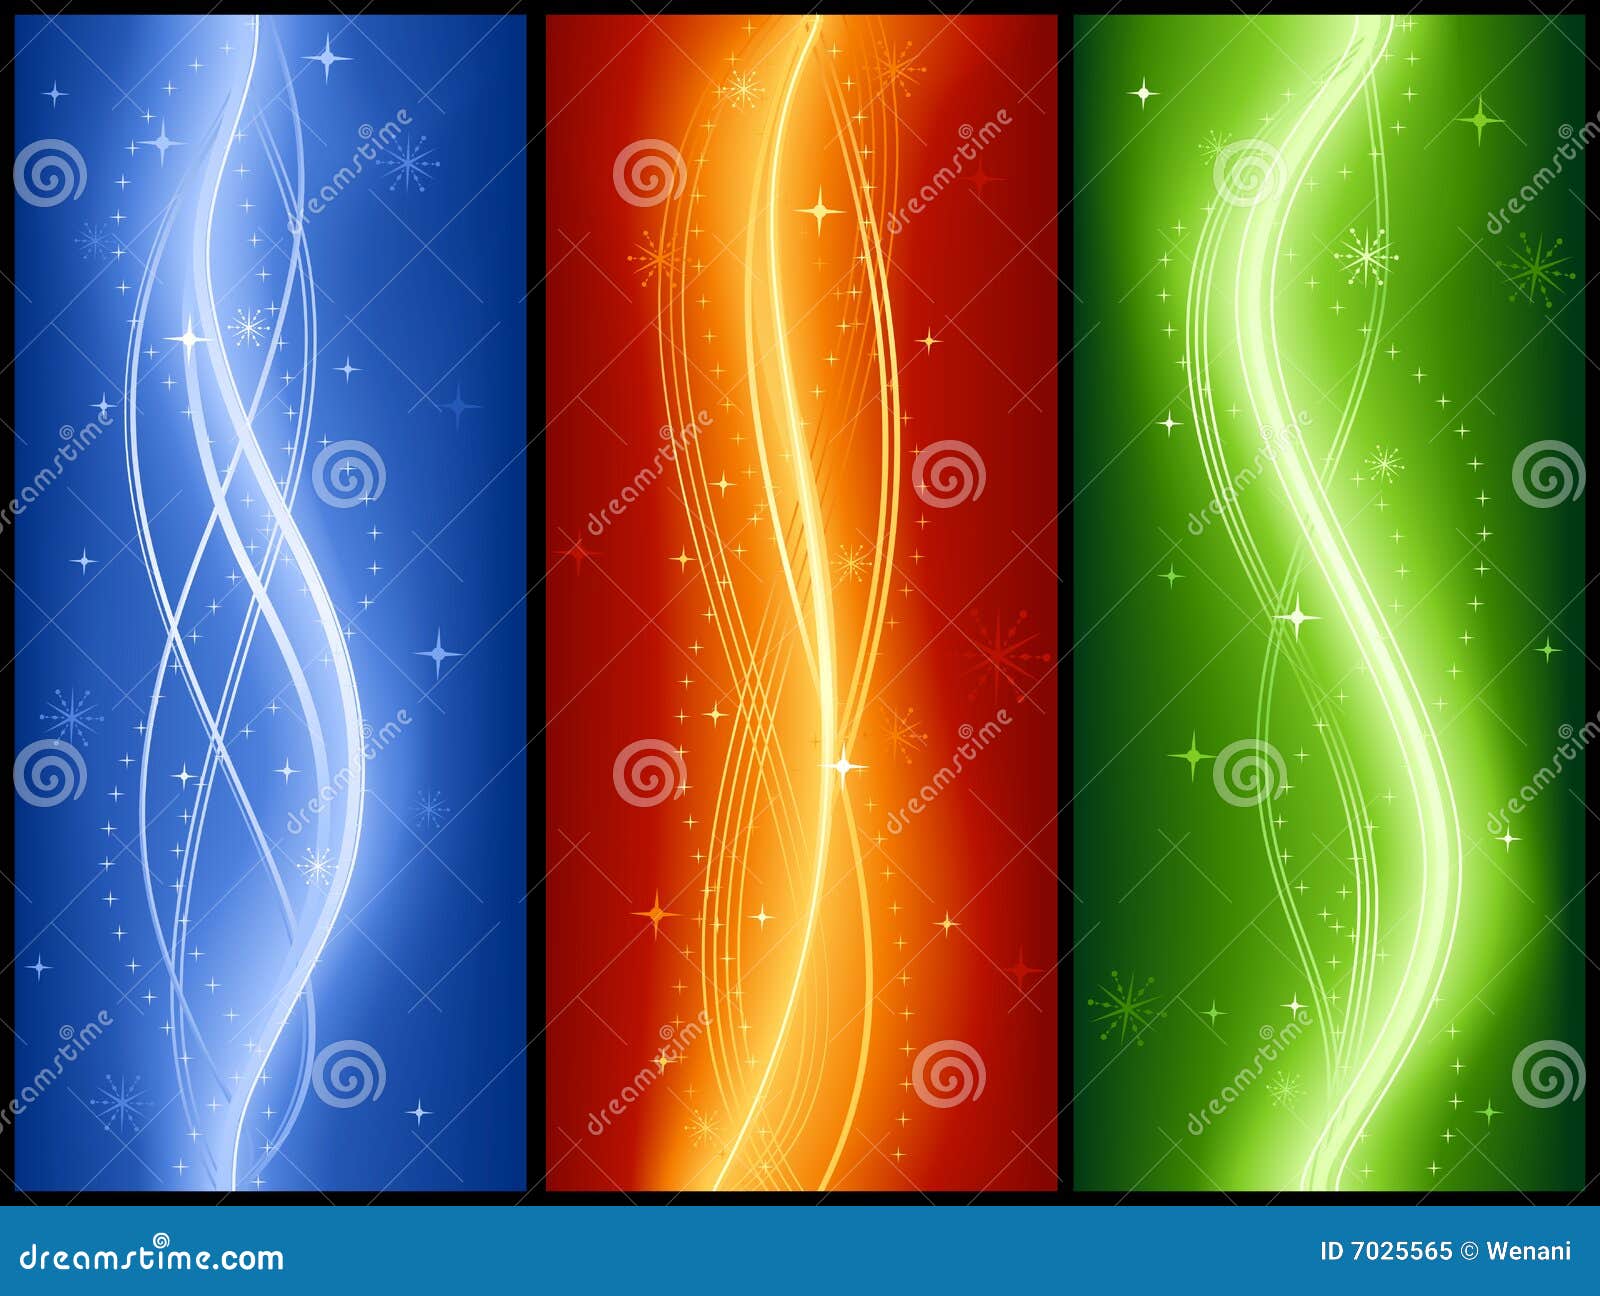 abstract wave bannes with stars, elegant, festiv